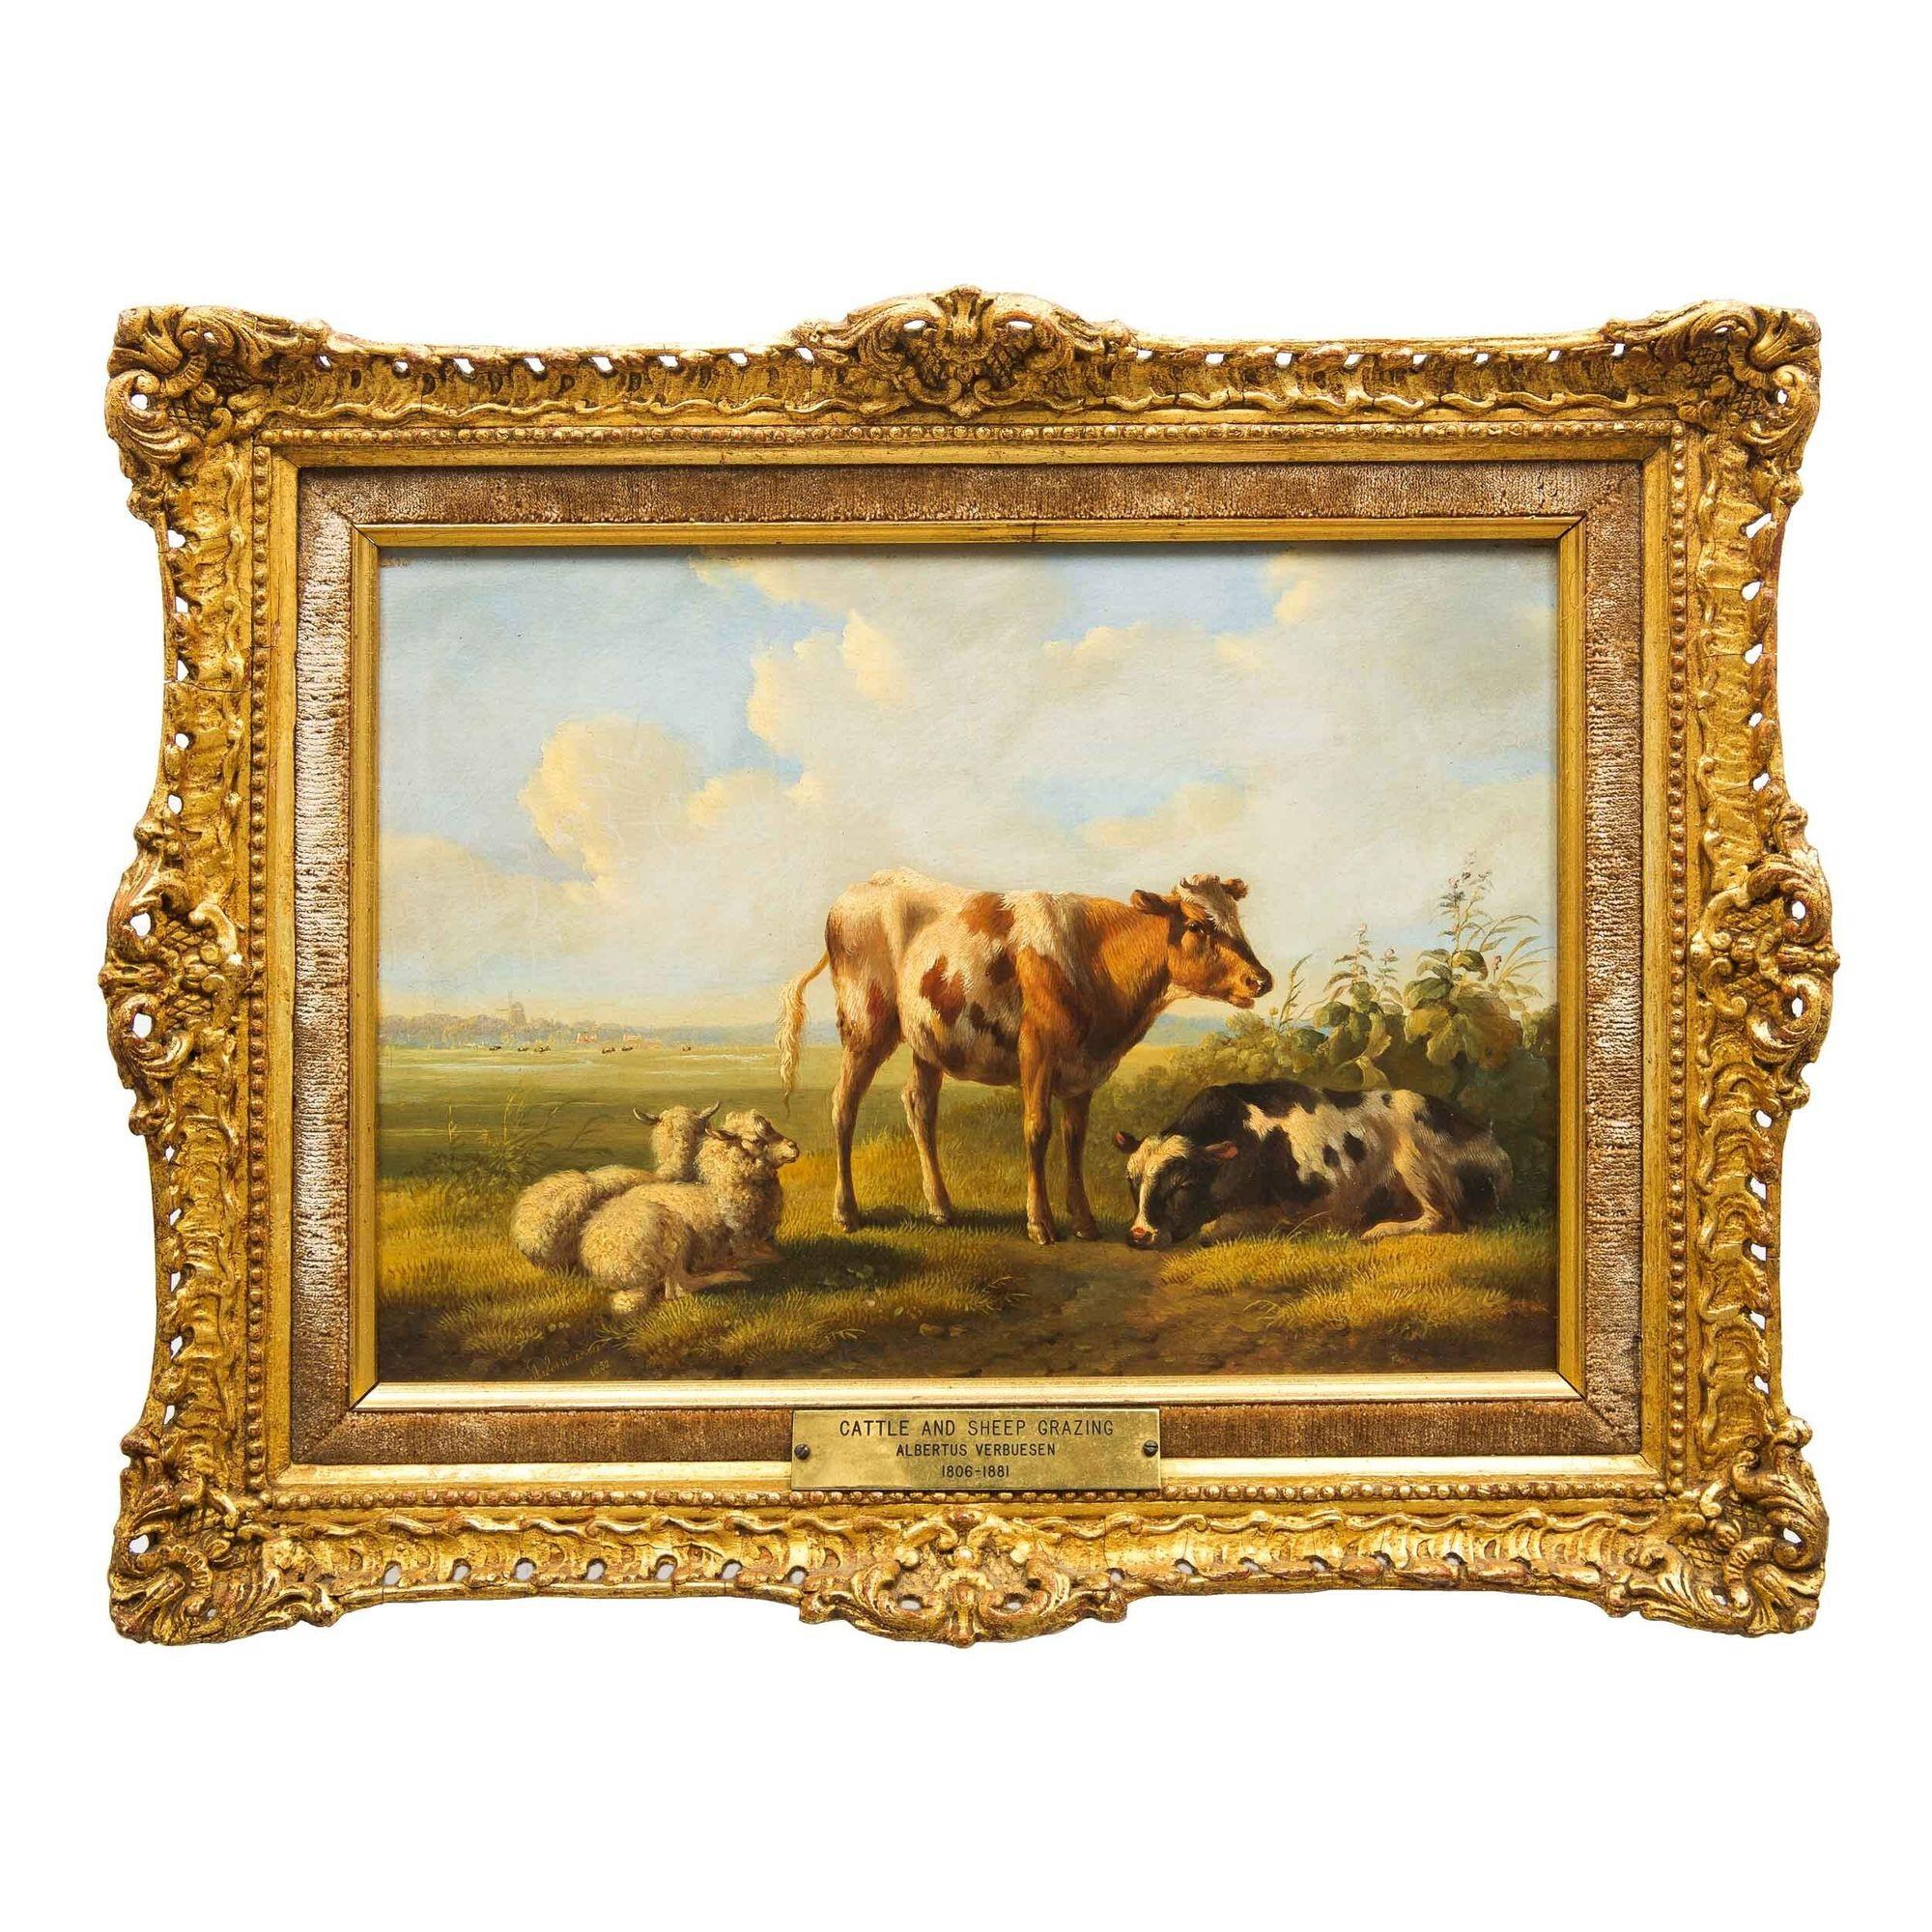 ALBERTUS VERHOESEN
Dutch, 1806-1881

Cattle and Sheep in a Landscape (1852)

Oil on panel  Signed lower left 